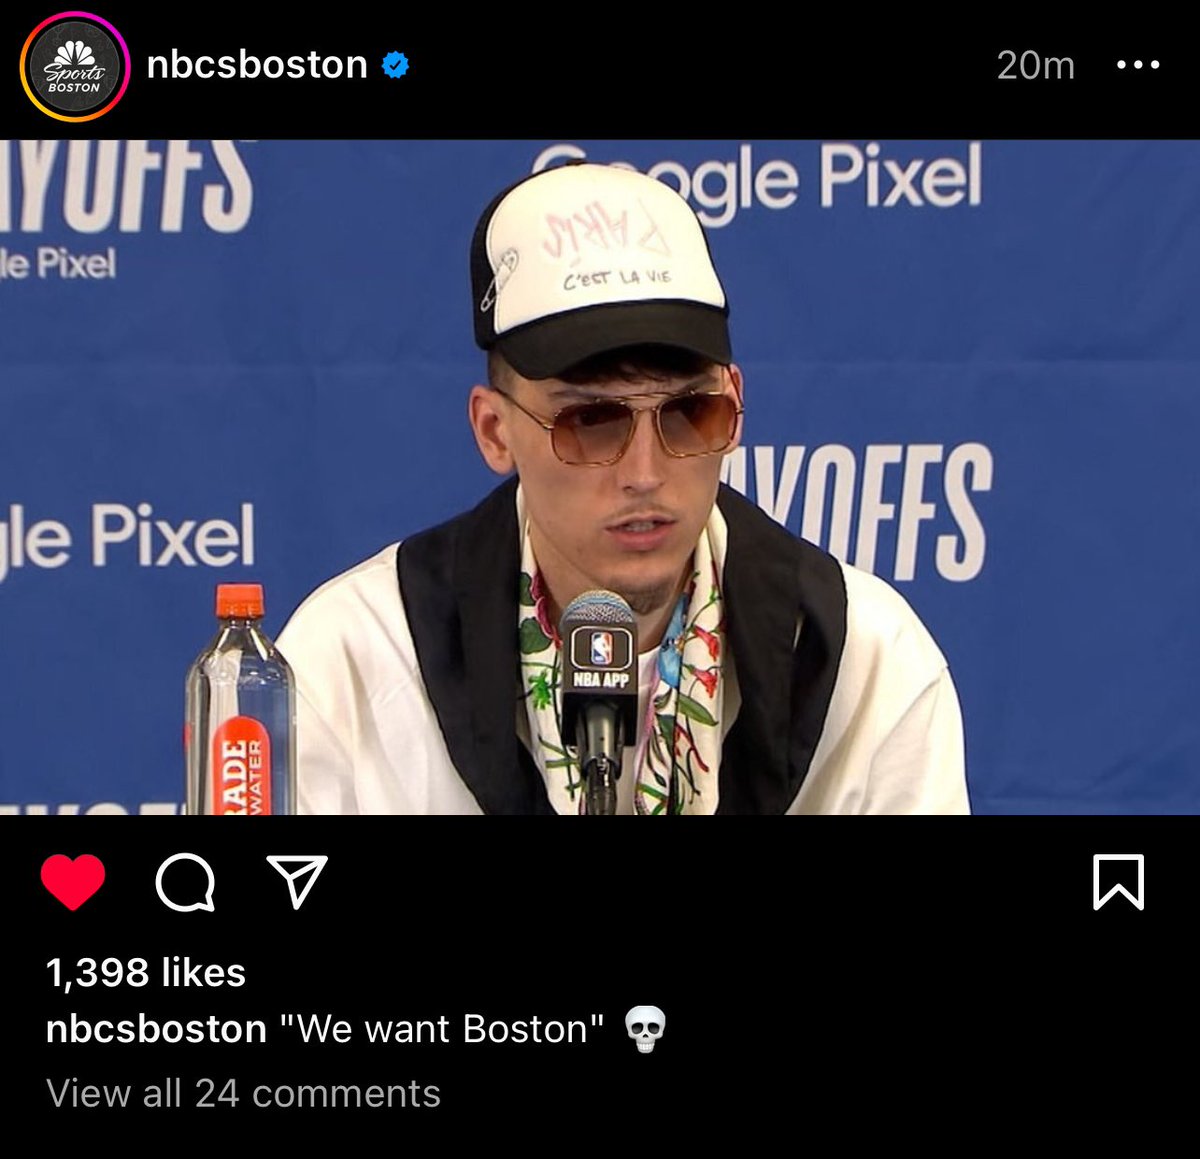 Tbh @NBCSBoston is the funniest insta page out there